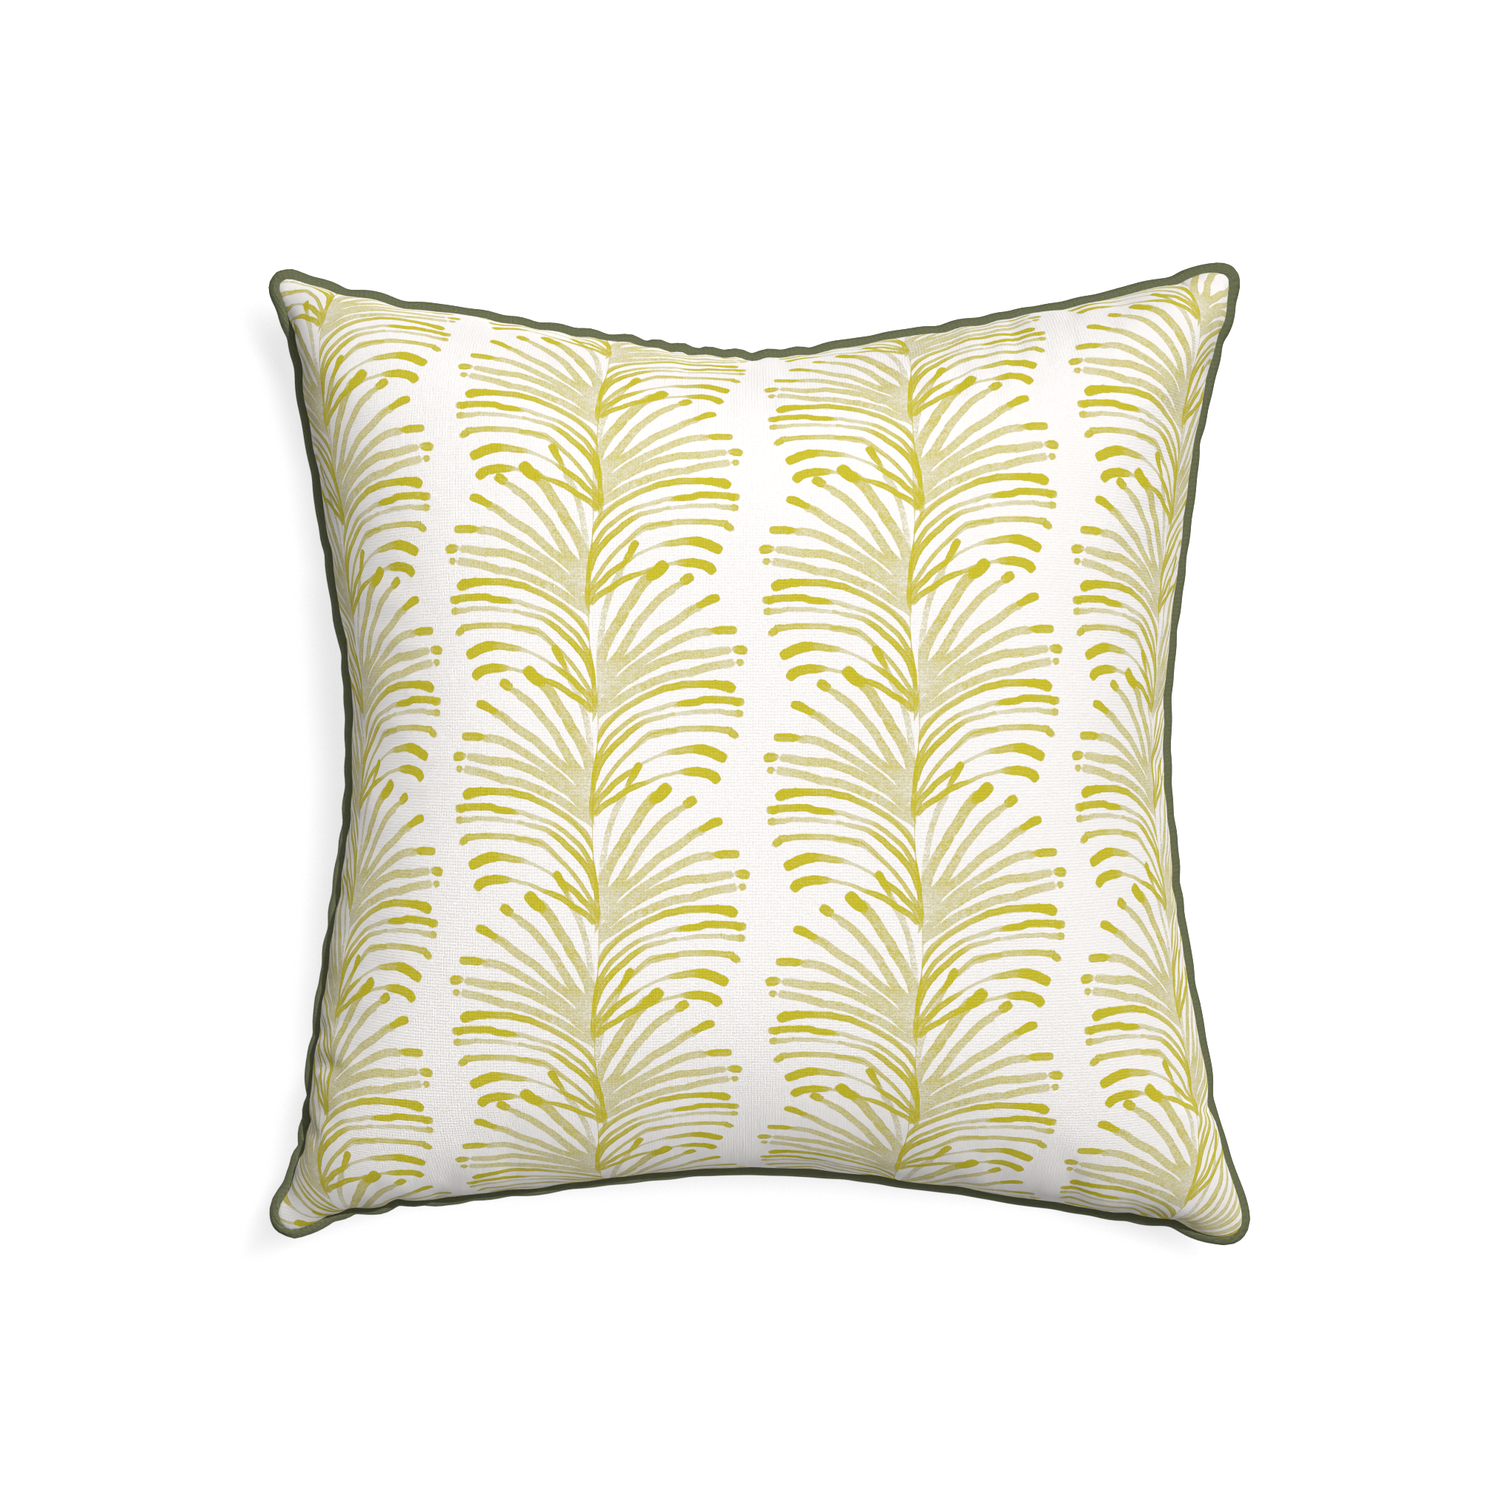 22-square emma chartreuse custom yellow stripe chartreusepillow with f piping on white background